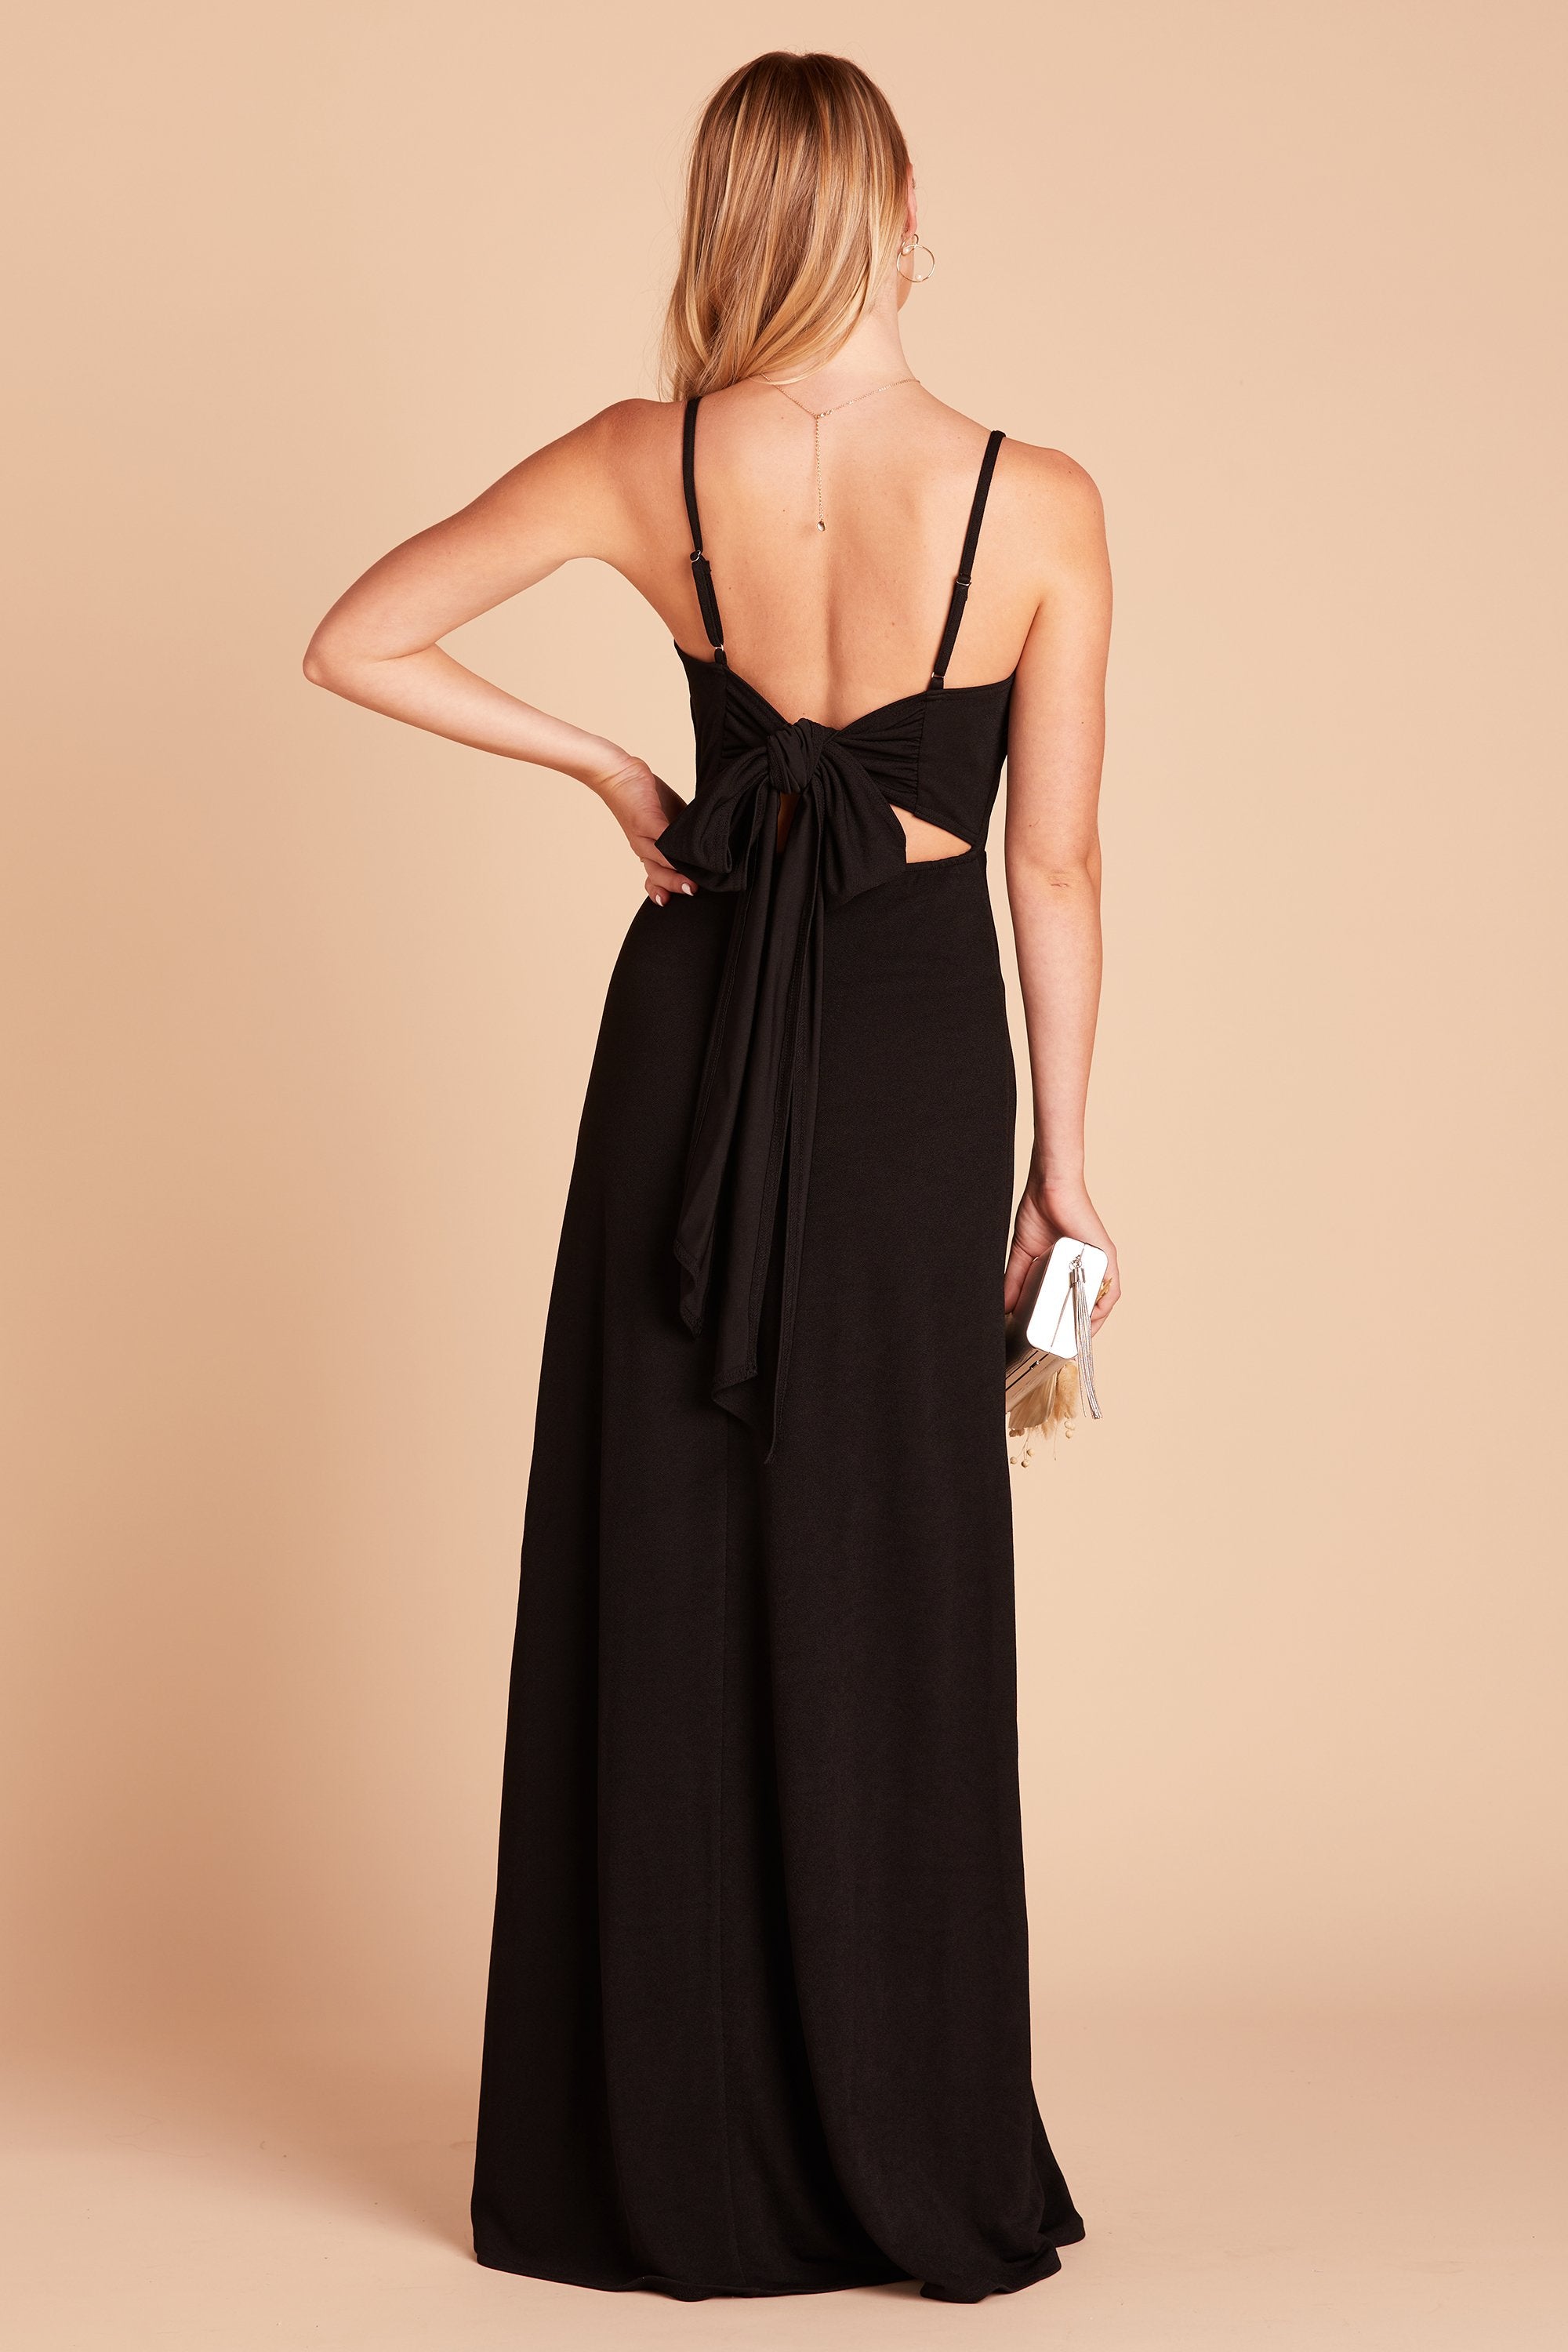 Benny bridesmaid dress in black crepe by Birdy Grey, back view